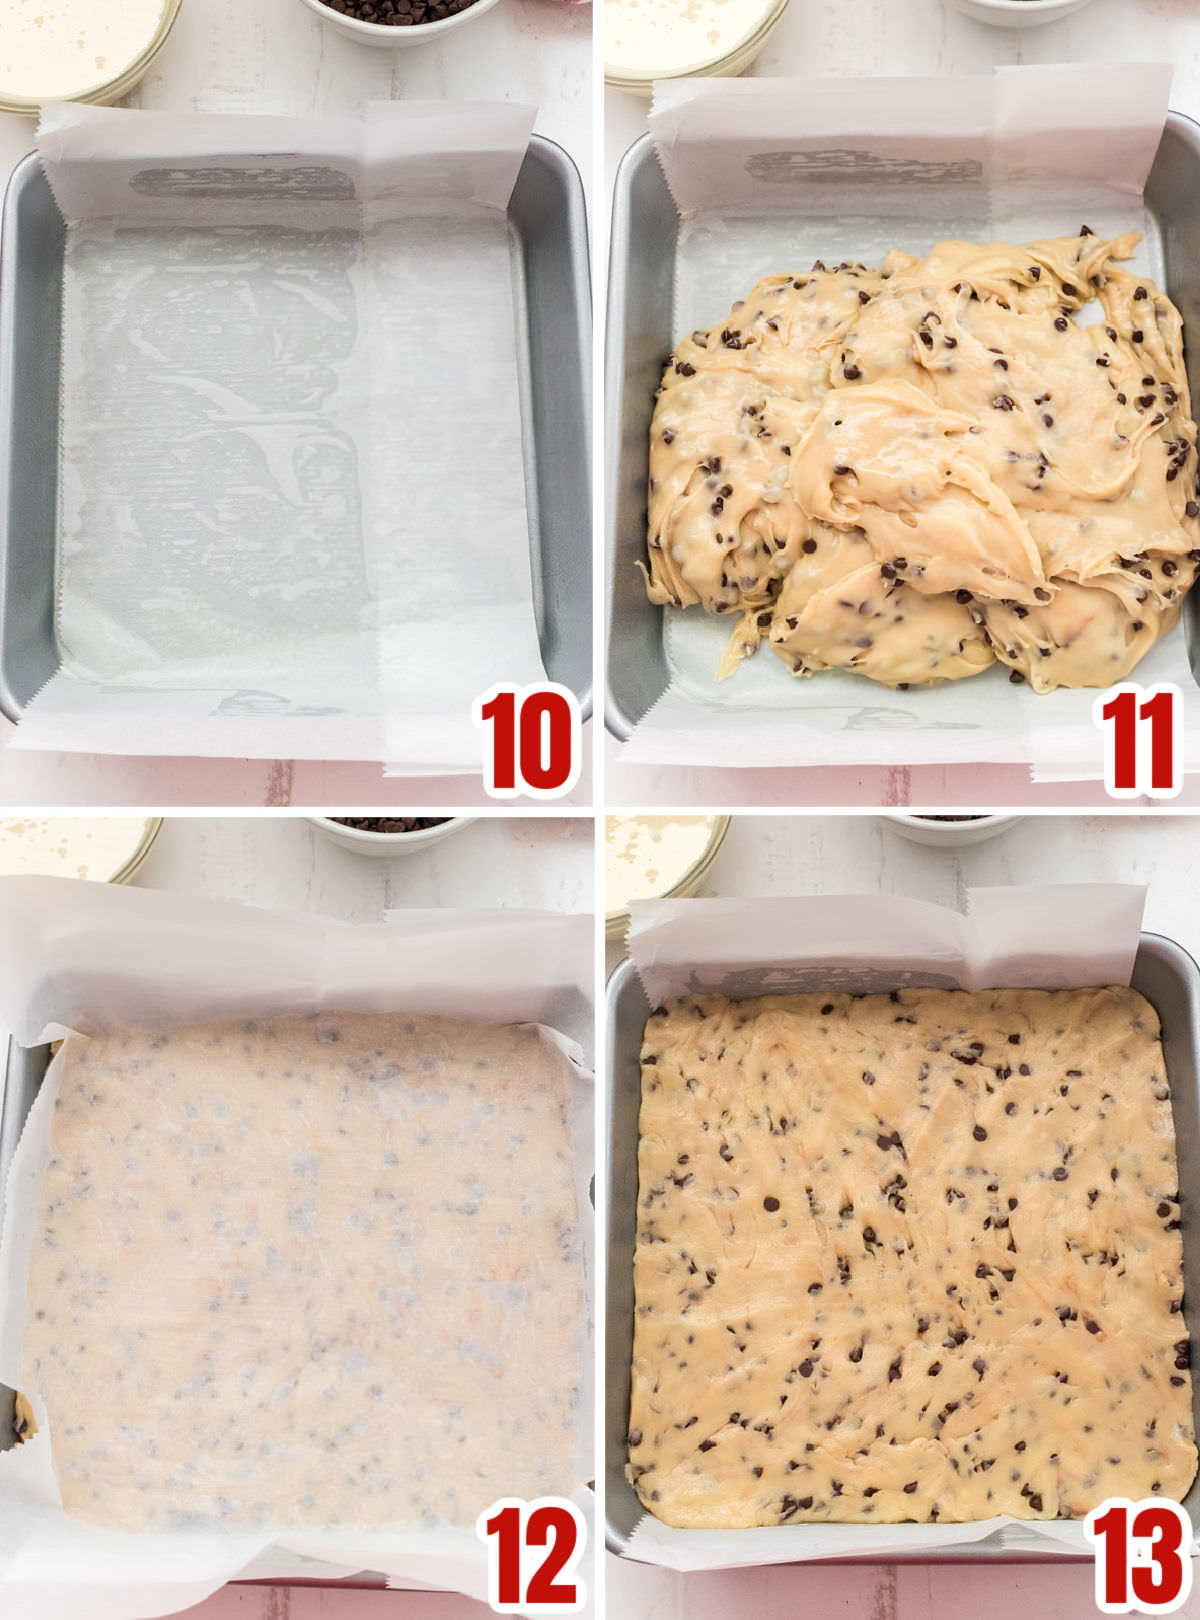 Collage image showing the steps for pour the Fudge mixture into an 8x8" pan for cooling.